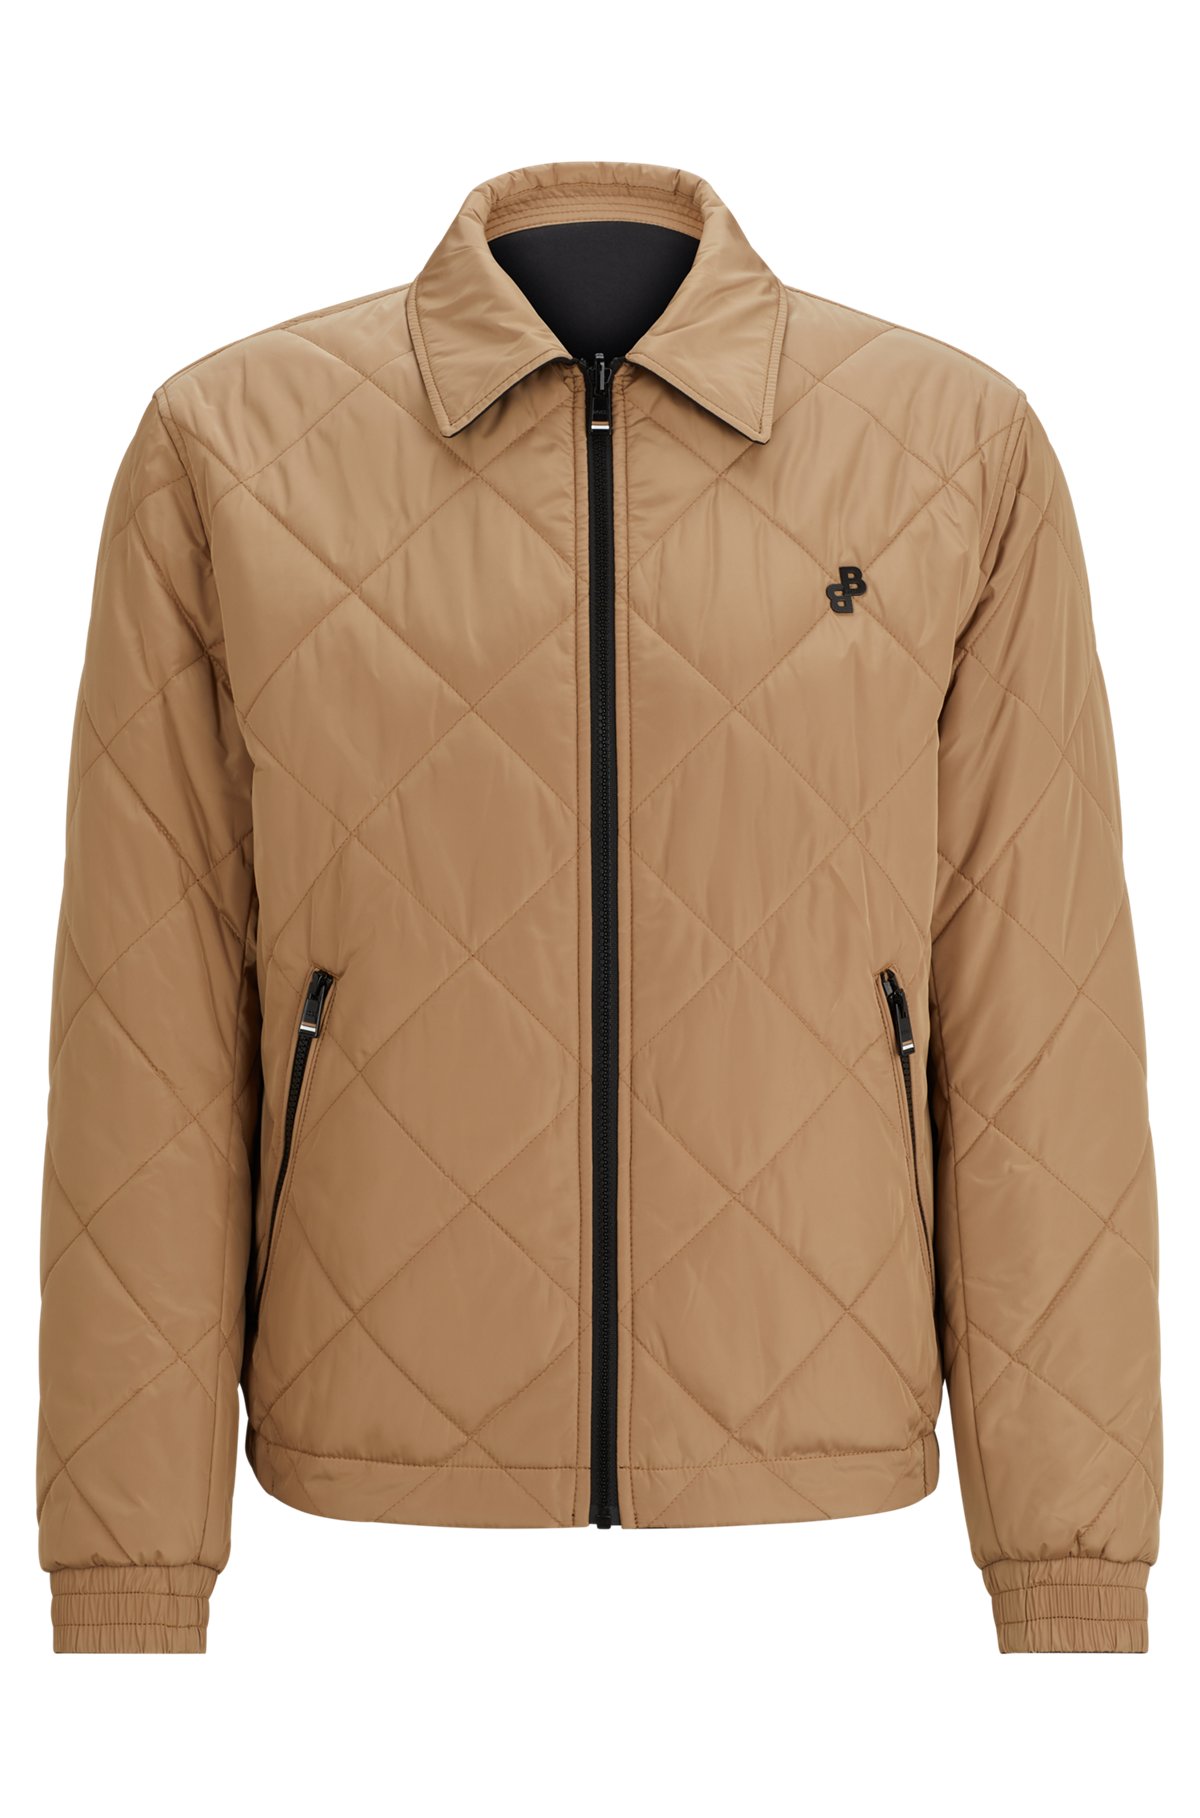 Hugo Boss Water-Repellent Reversible Quilted Jacket with Monogram Trim- Beige | Men's Casual Jackets Size 42r